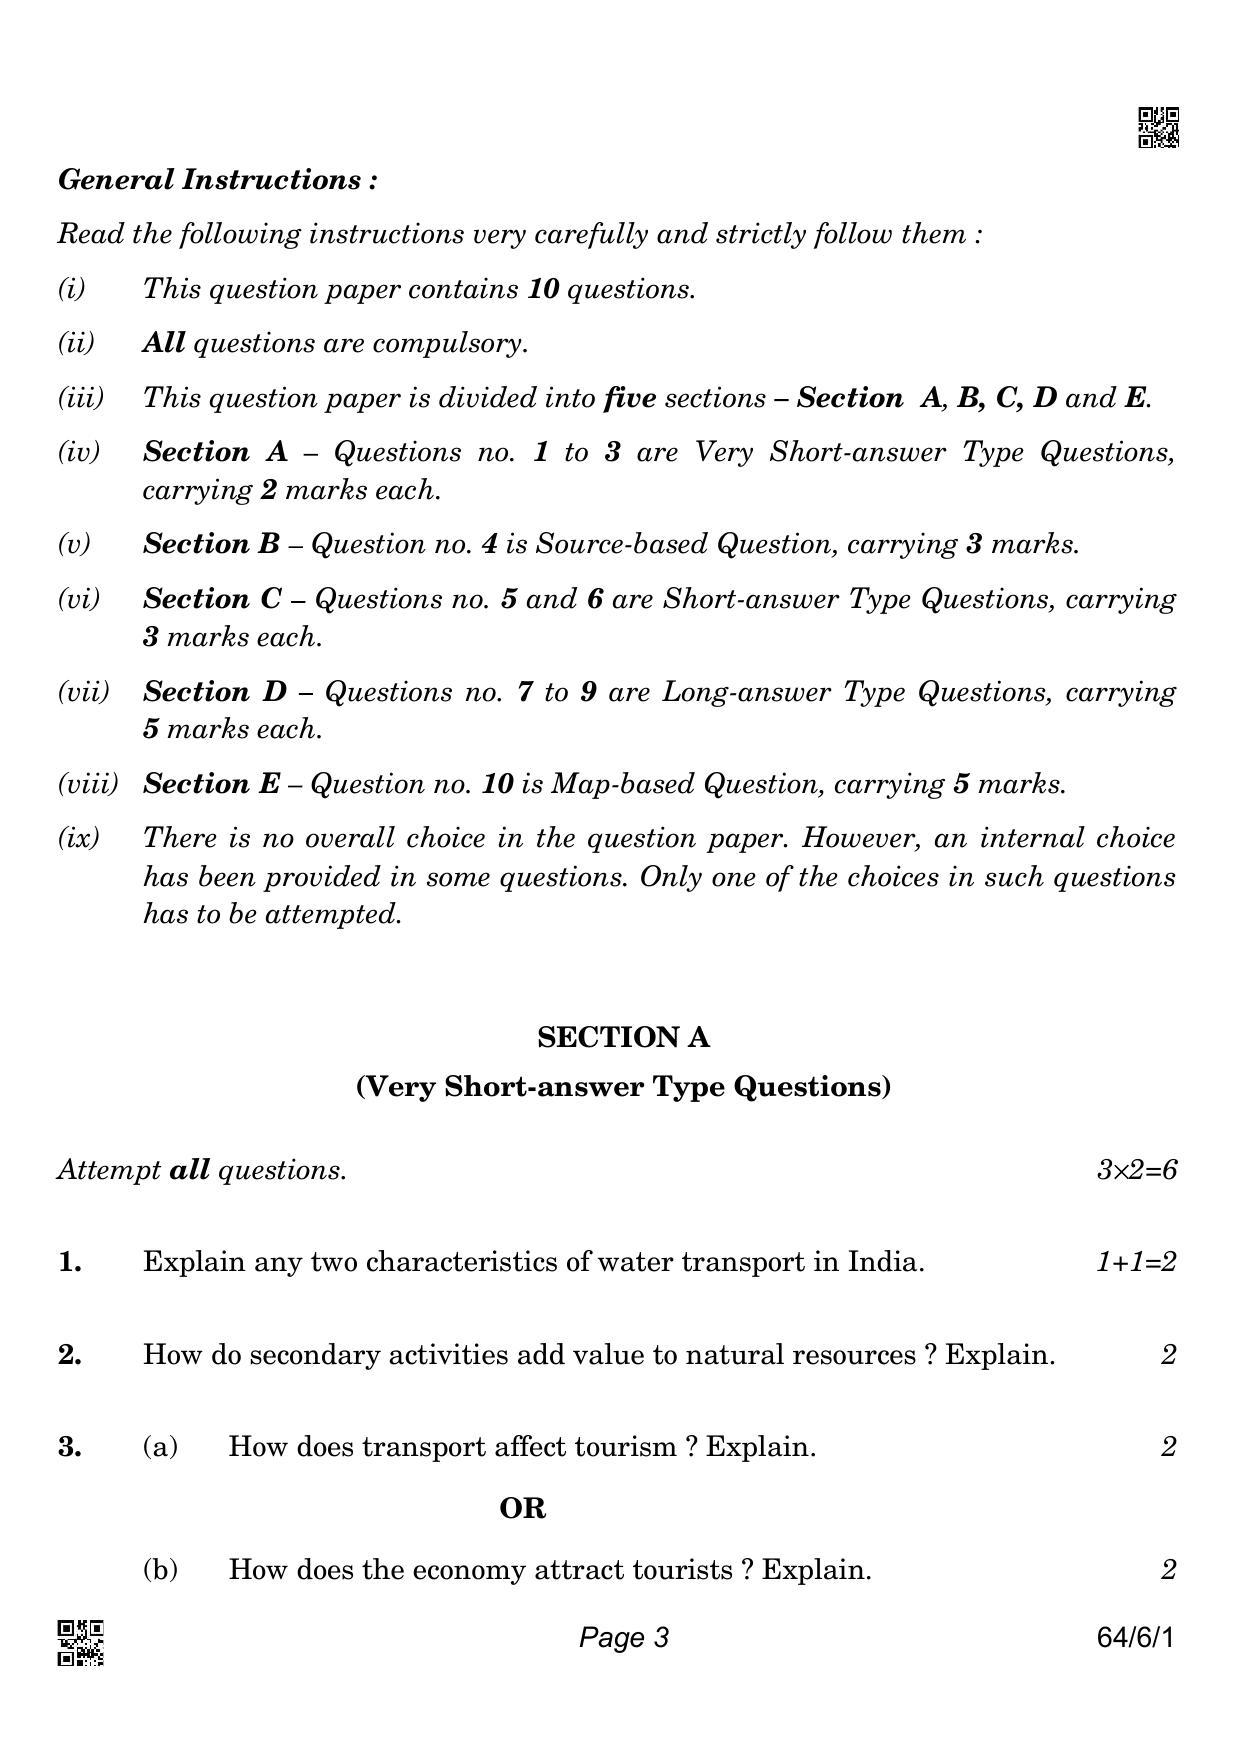 CBSE Class 12 64-6-1 GEOGRAPHY 2022 Compartment Question Paper - Page 3